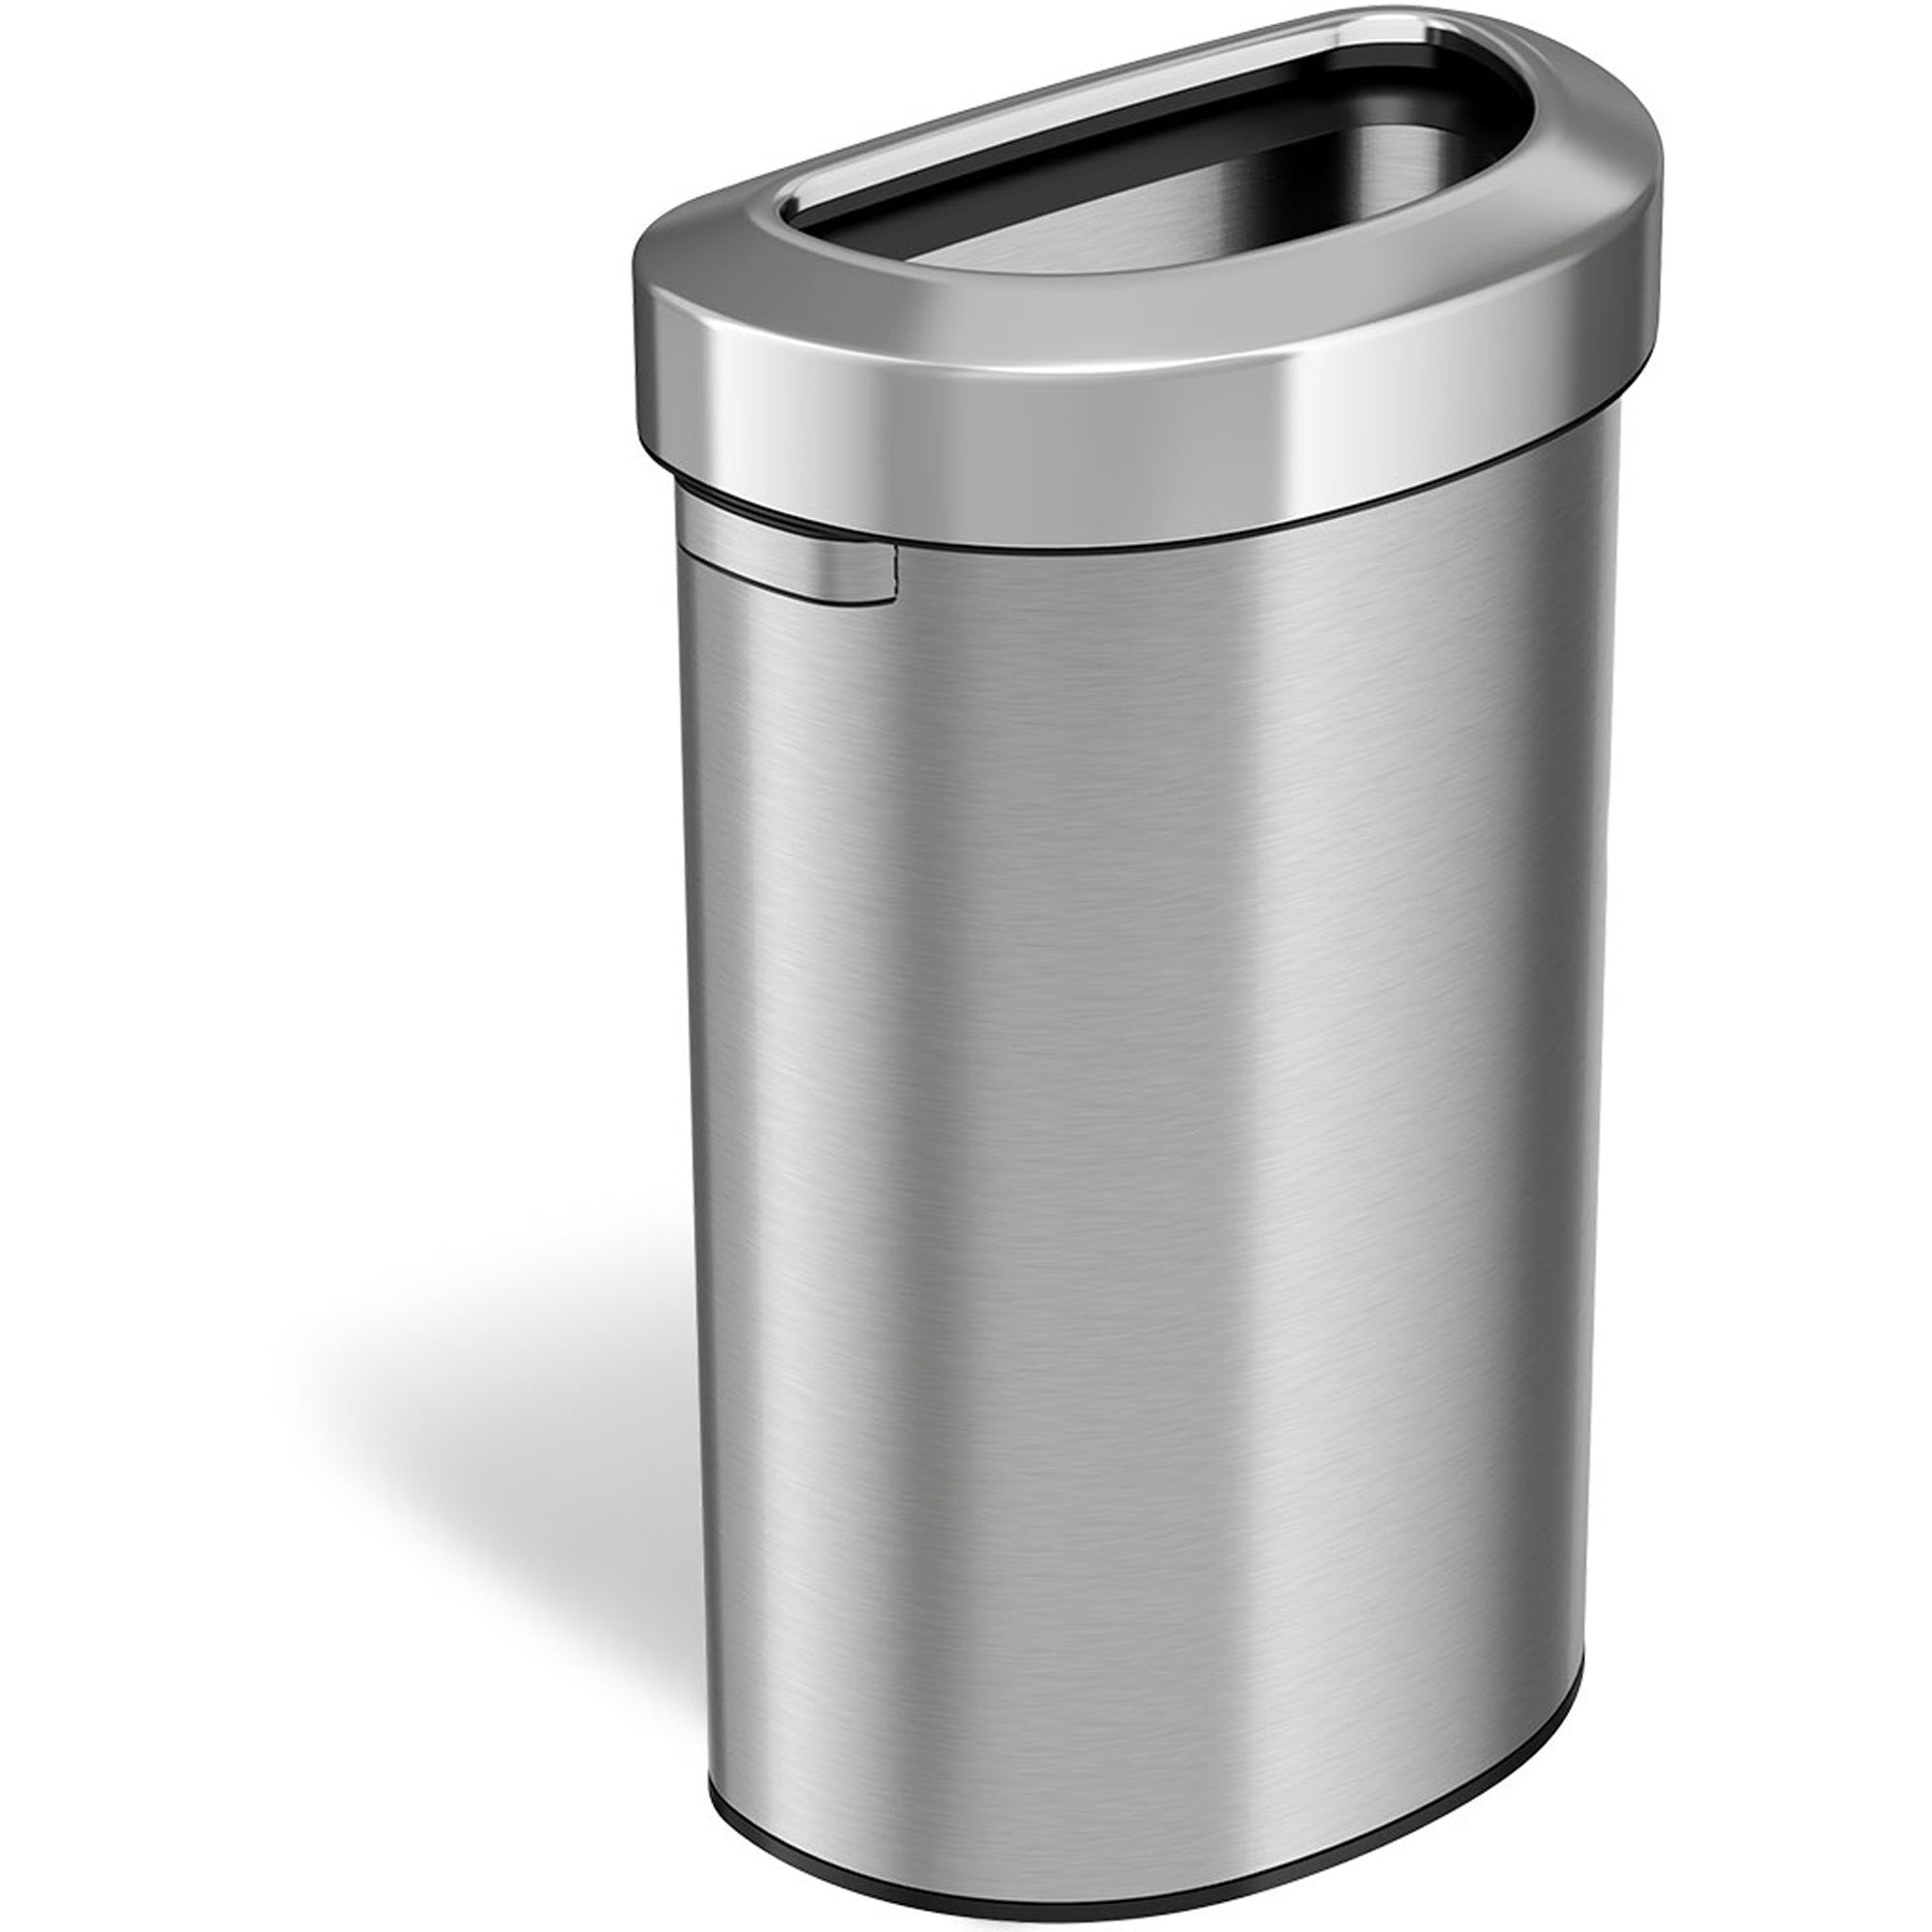 hls-commercial-semi-round-open-top-trash-can-23-gal-capacity-half-round-fingerprint-proof-smudge-resistant-durable-handle-33-height-x-124-width-x-198-depth-stainless-steel-silver-1-each_hlchls23dot - 1